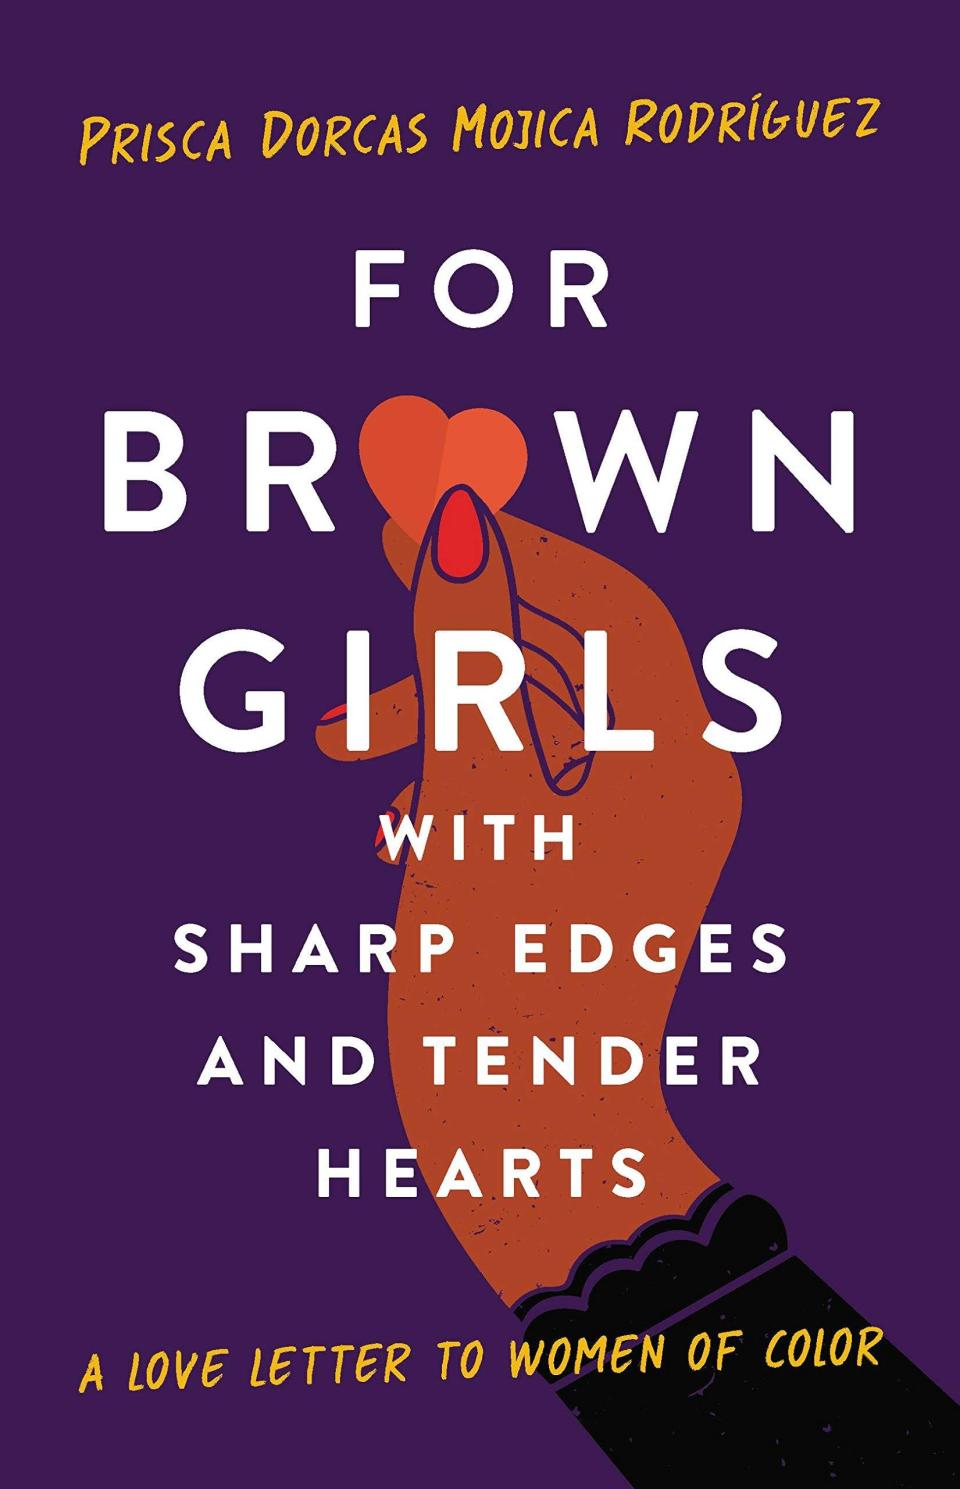 &quot;For Brown Girls With Sharp Edges and Tender Hearts,&quot; by Prisca Dorcas Mojica Rodr&#xed;guez